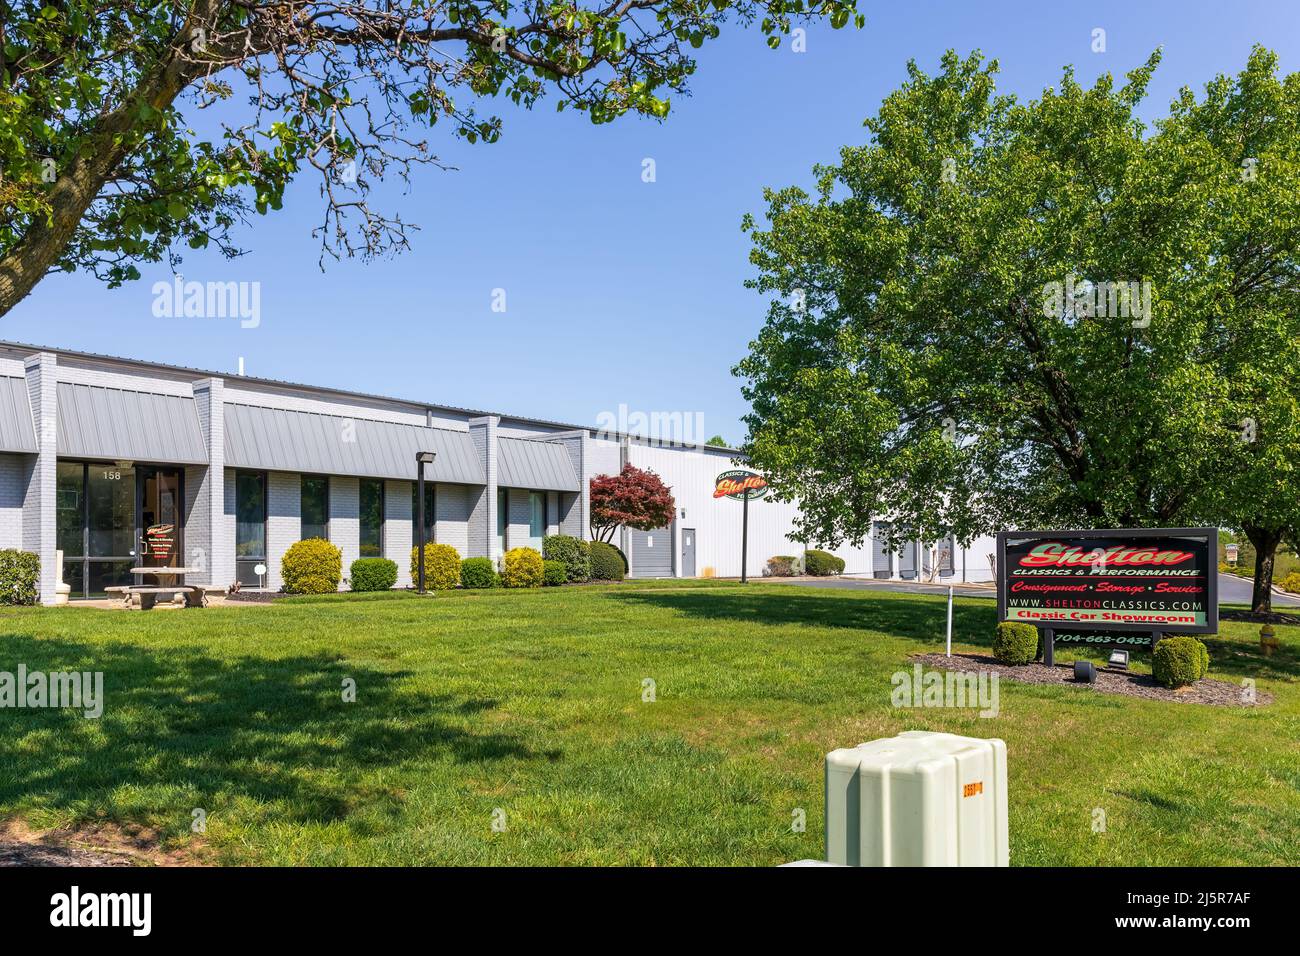 MOORESVILLE, NC, USA-17 APRIL 2022: Shelton Classics & Performance, Classic Car Showroom building and signs. Stock Photo